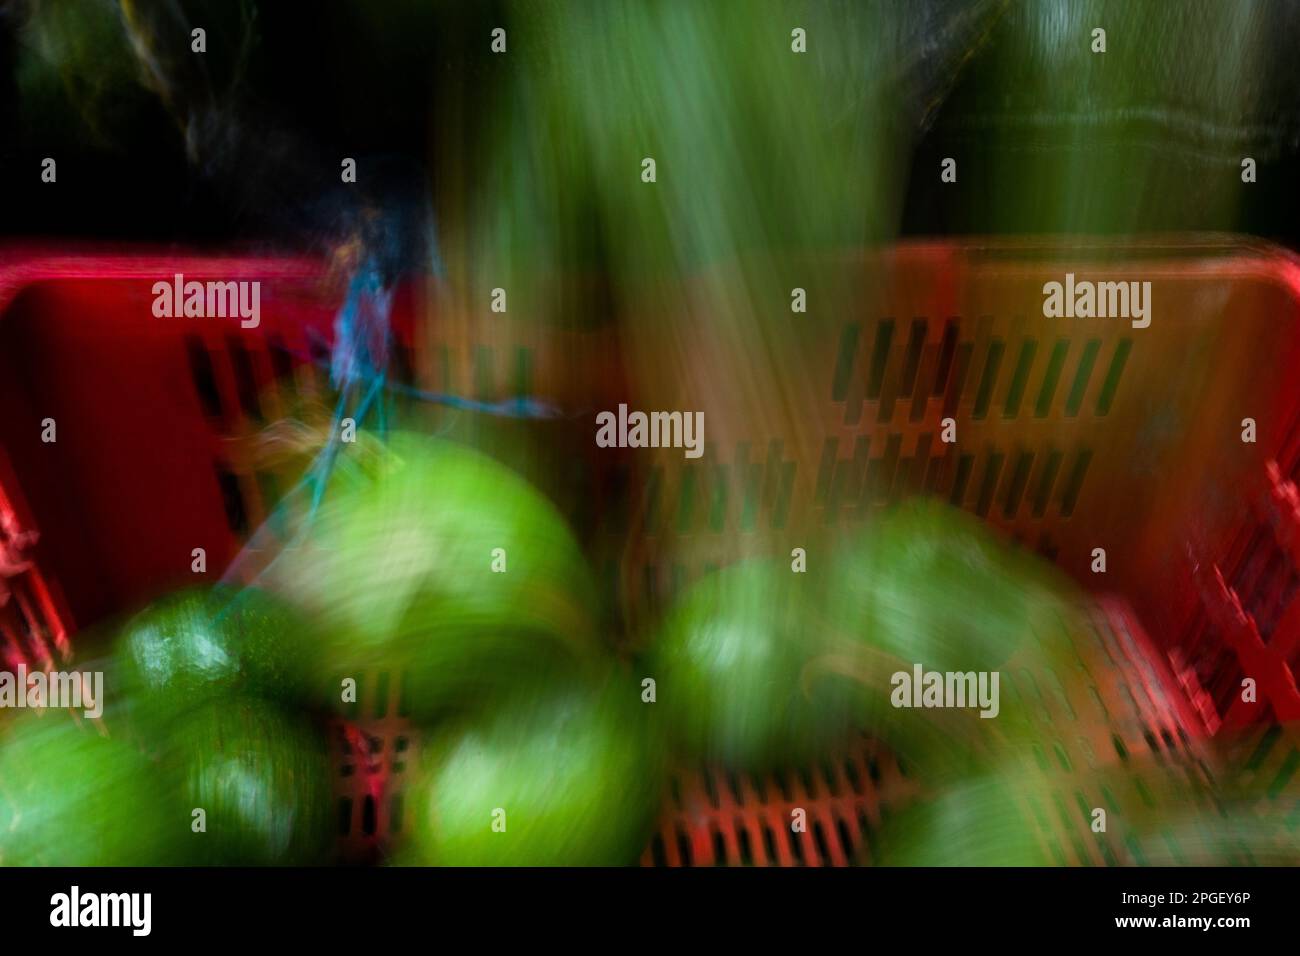 Fresh avocados are seen transferred from a mesh bag into a plastic crate in the street market in Cali, Colombia. Stock Photo